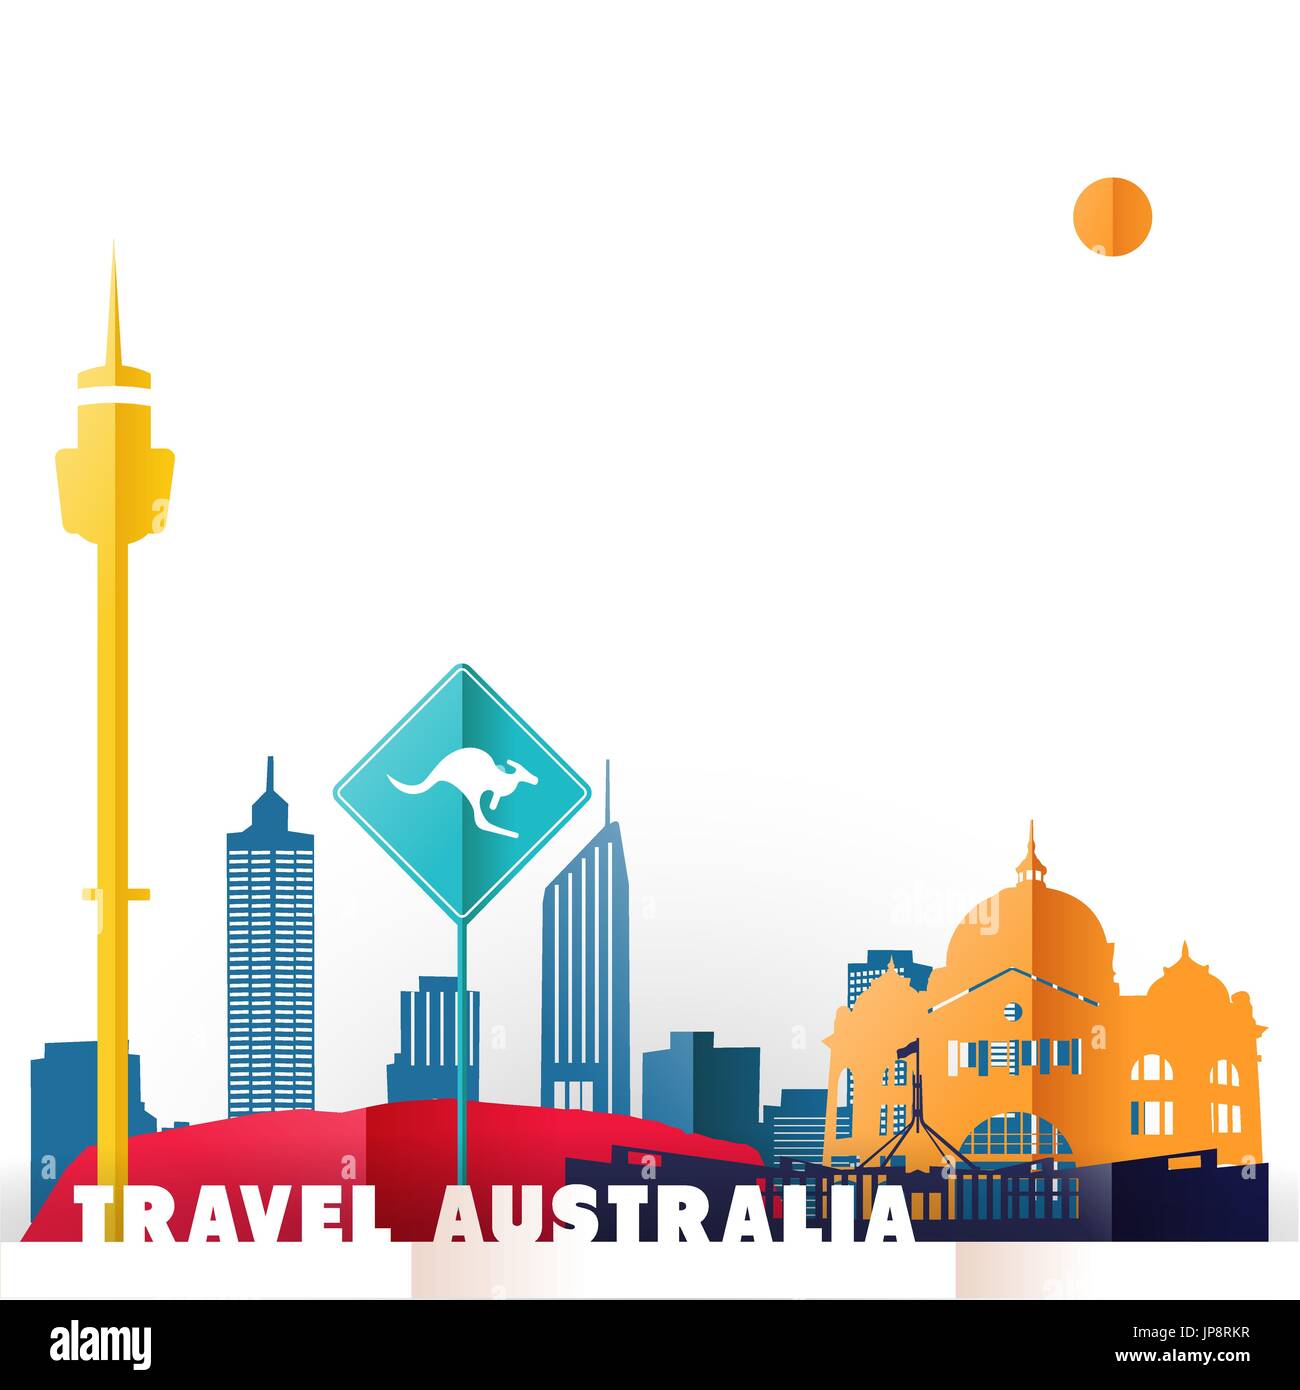 Travel Australia concept illustration in paper cut style, famous world landmarks of Australian country. Includes Sydney tower, kangaroo sign, Melbourn Stock Vector